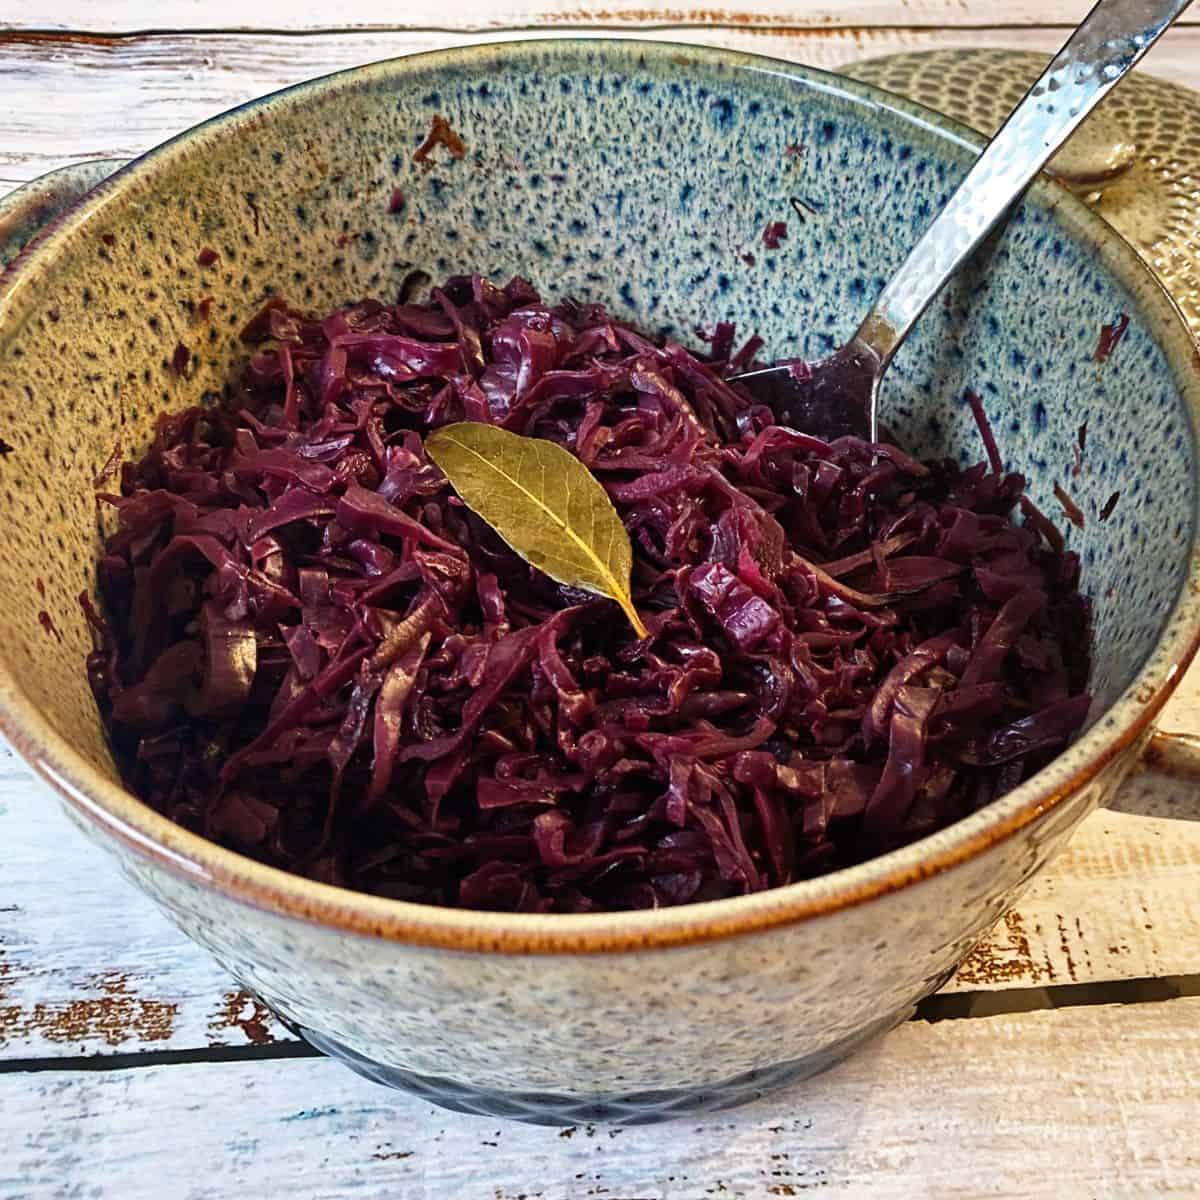 Braised red cabbage in a casserole dish with a spoon. Garnished with a bayleaf.